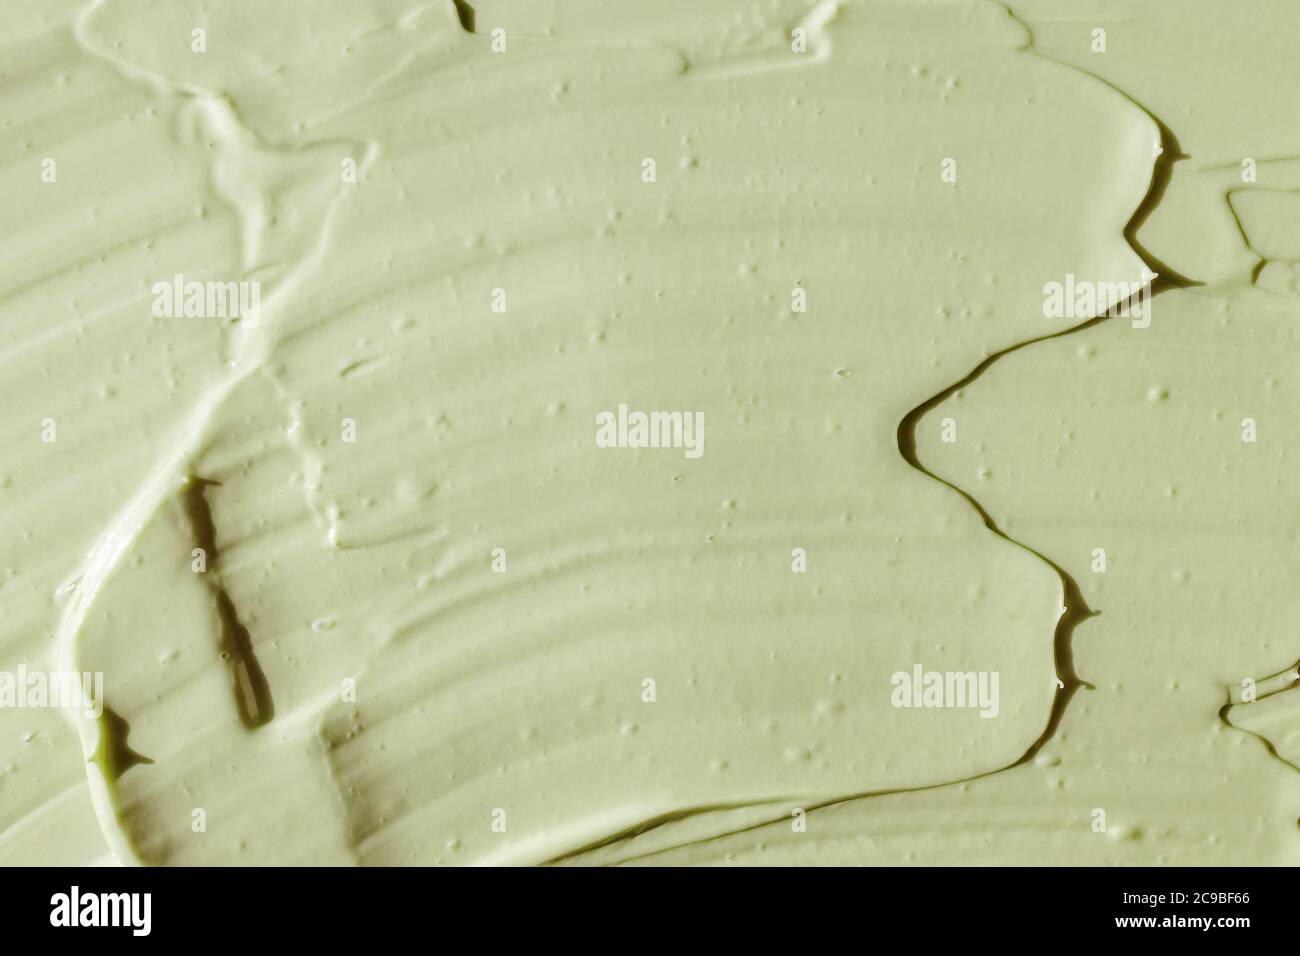 Green cosmetic clay texture close-up Stock Photo